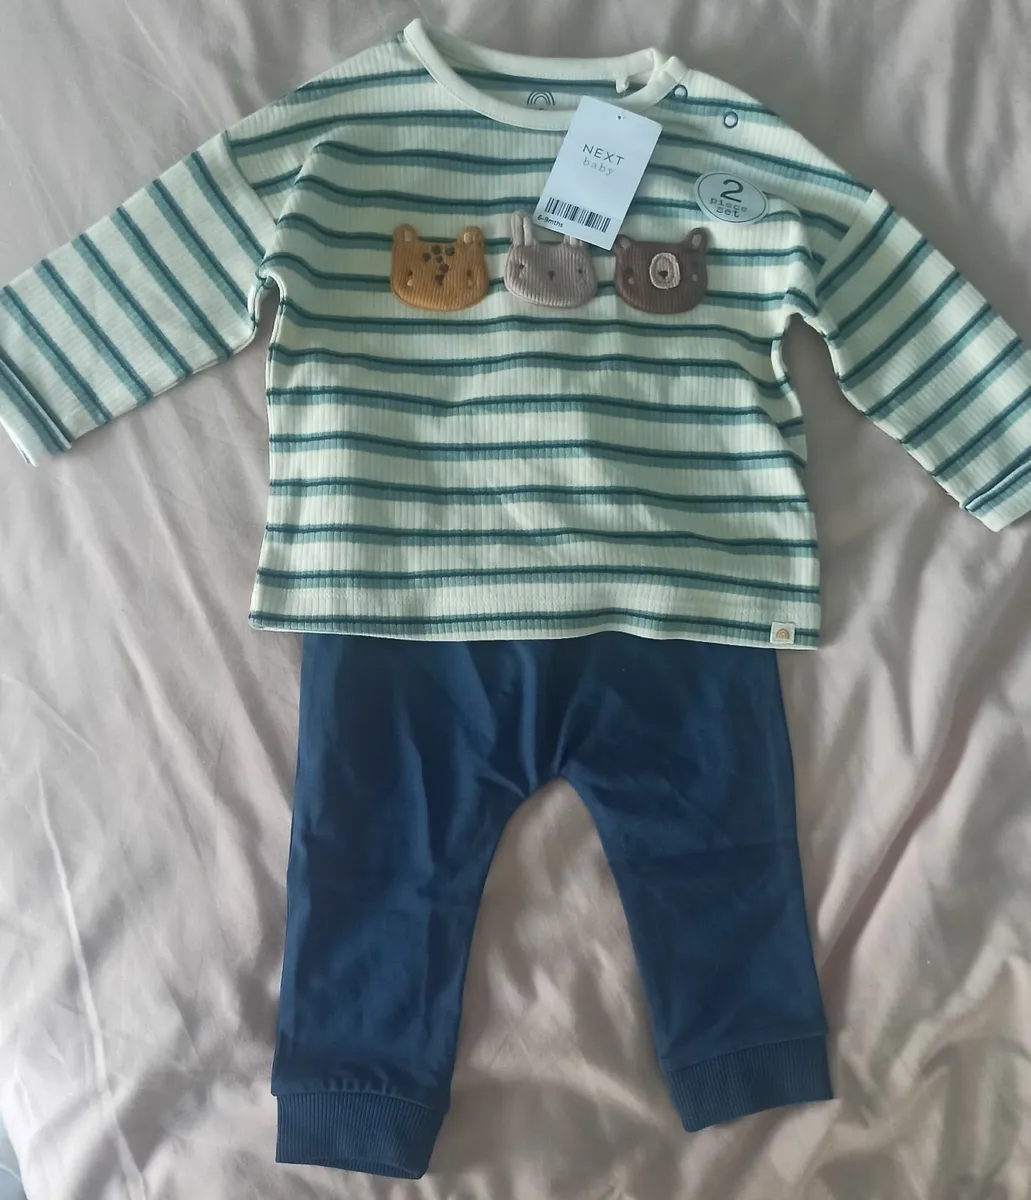 Baby Boys Clothes New 6 - 9 Months - Image 1